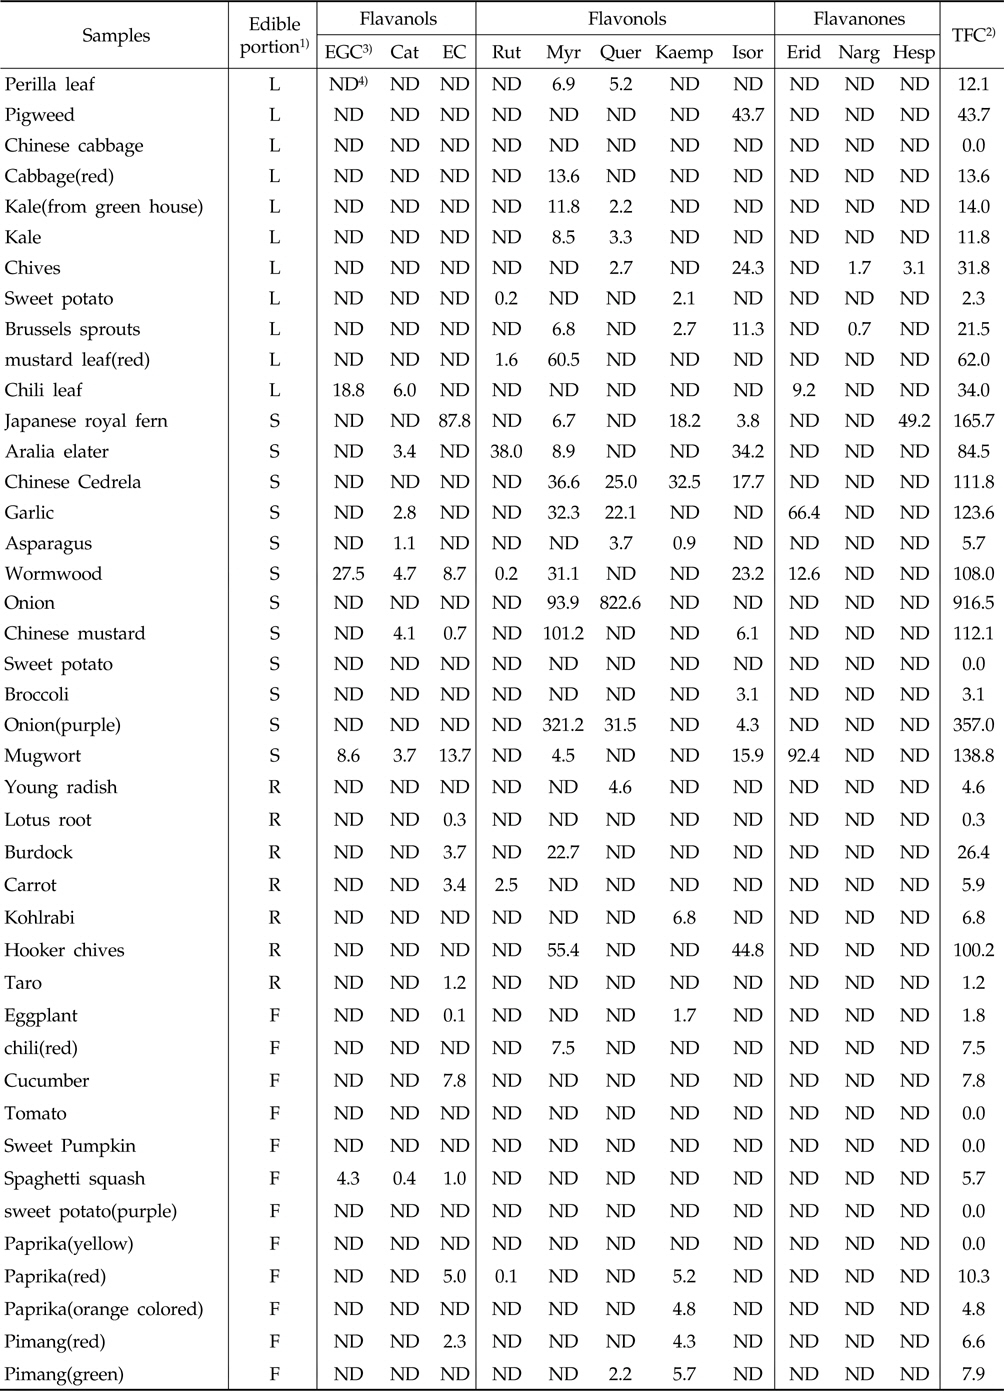 The composition and content of flavonoids in 42 vegetables by edible portion (㎎ /100 g dry weight)